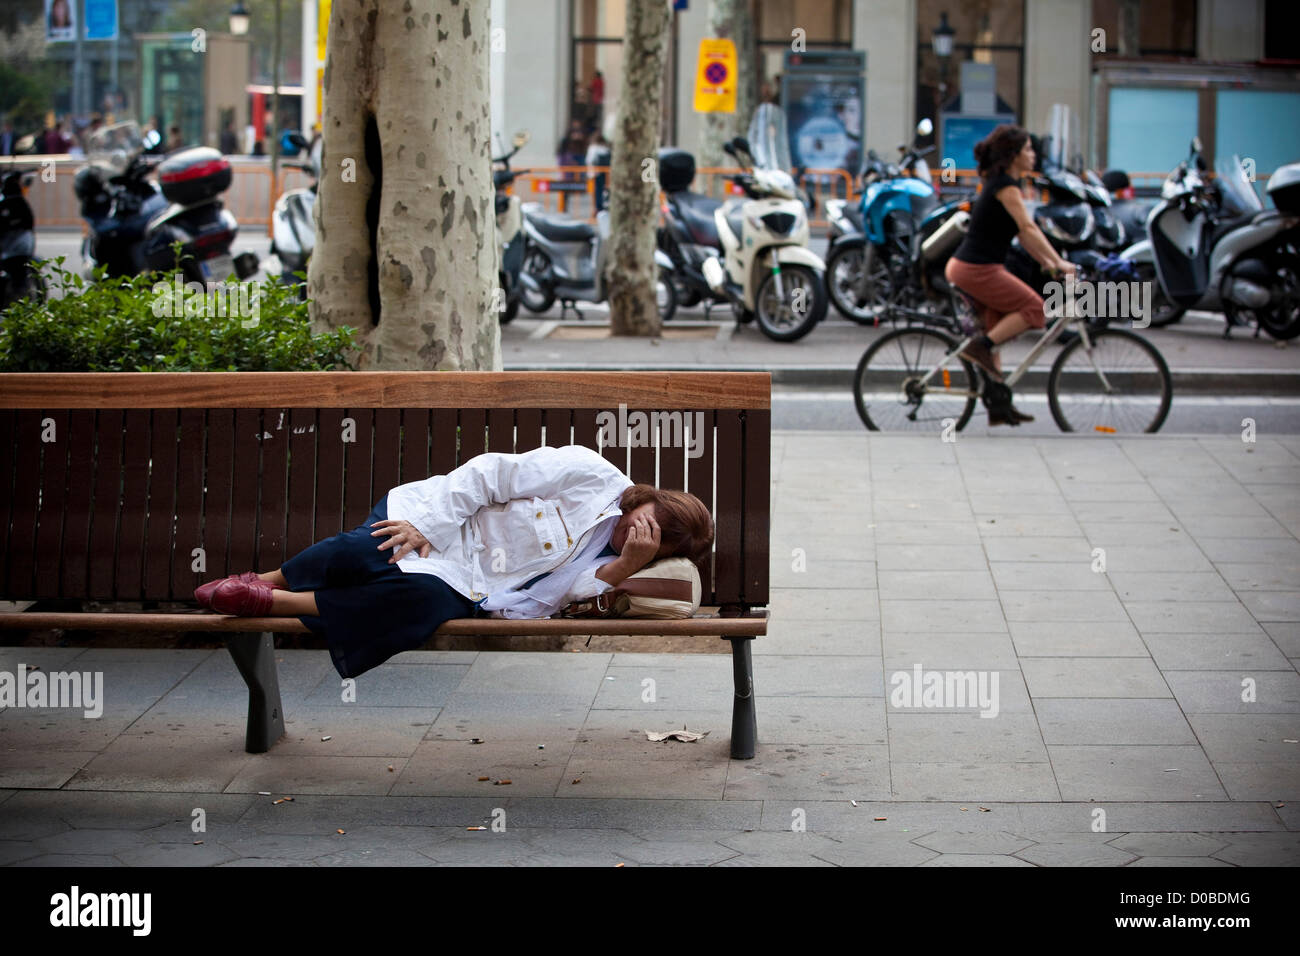 Passeig De Gracia, Barcelona, Catalonia.21.12.2012 Picture shows a woman lying on a bench at Passeig De Gracia, feeling the weight of the economic gloom over Catalonia and Spain during Europe's struggle to maintain the Euro overshadowed by another EU Summit dependent on agreeing bail-out conditions for debt ridden member nations. Stock Photo